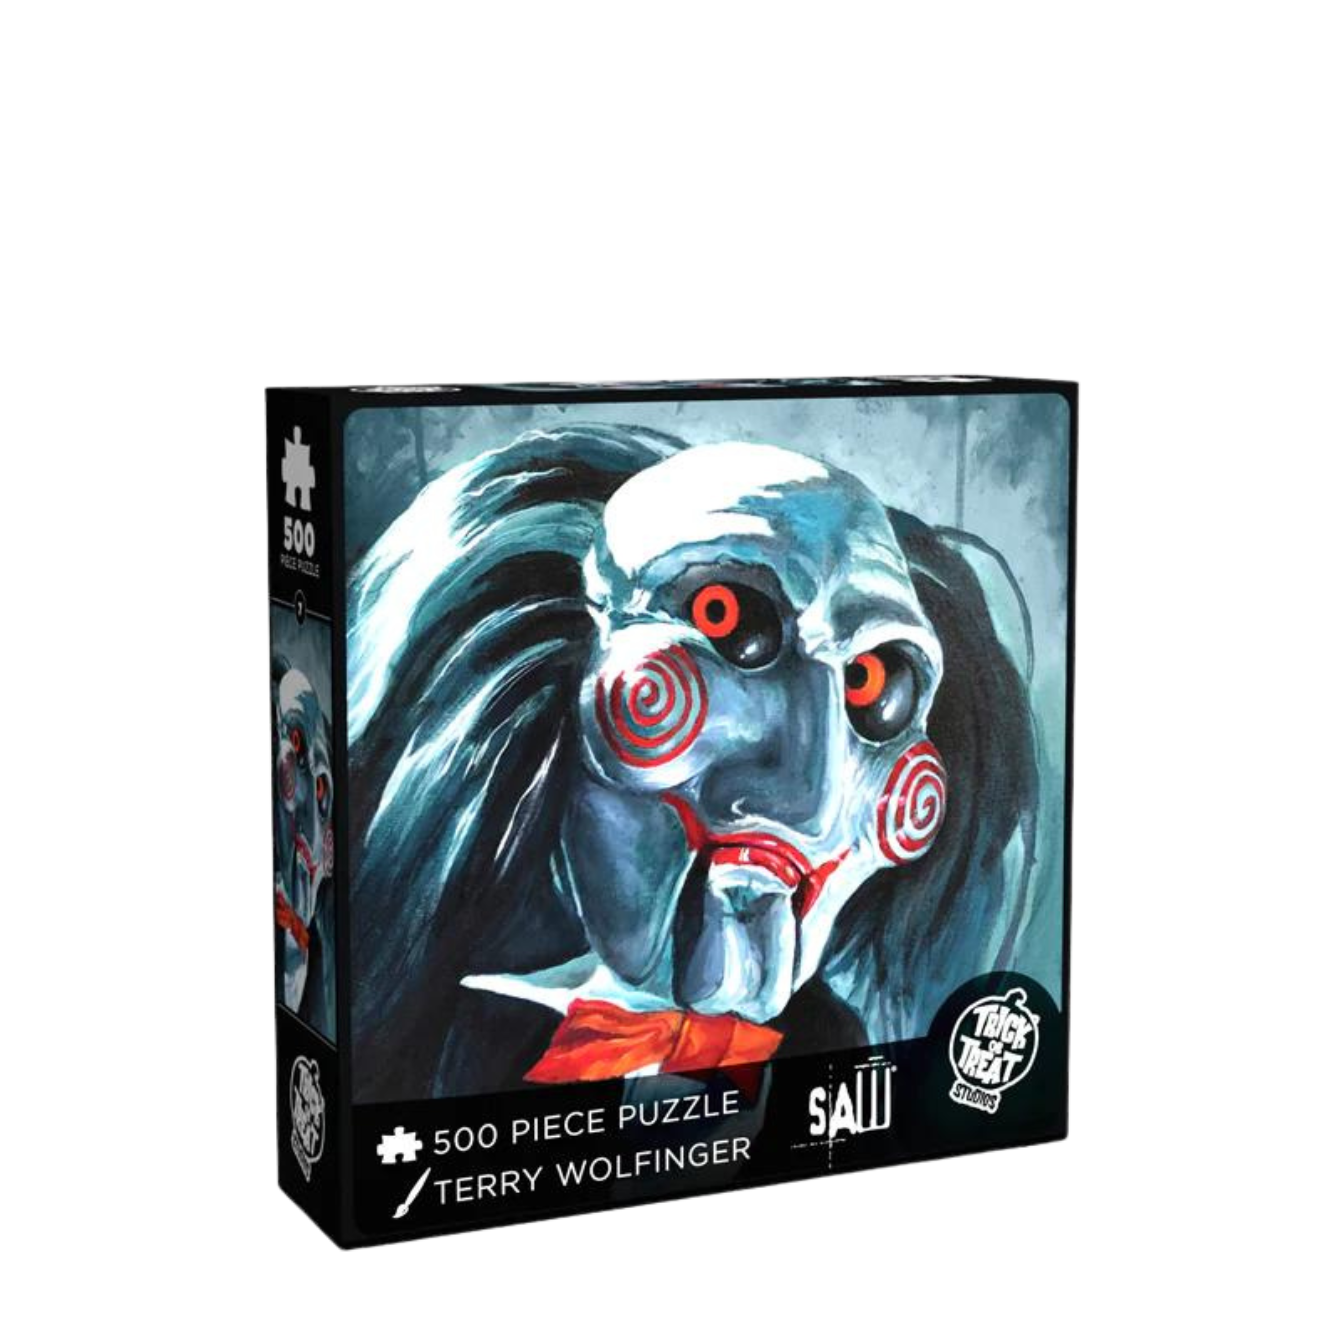 PRE-ORDER SAW- BILLY THE PUPPET 500 PIECE JIGSAW PUZZLE